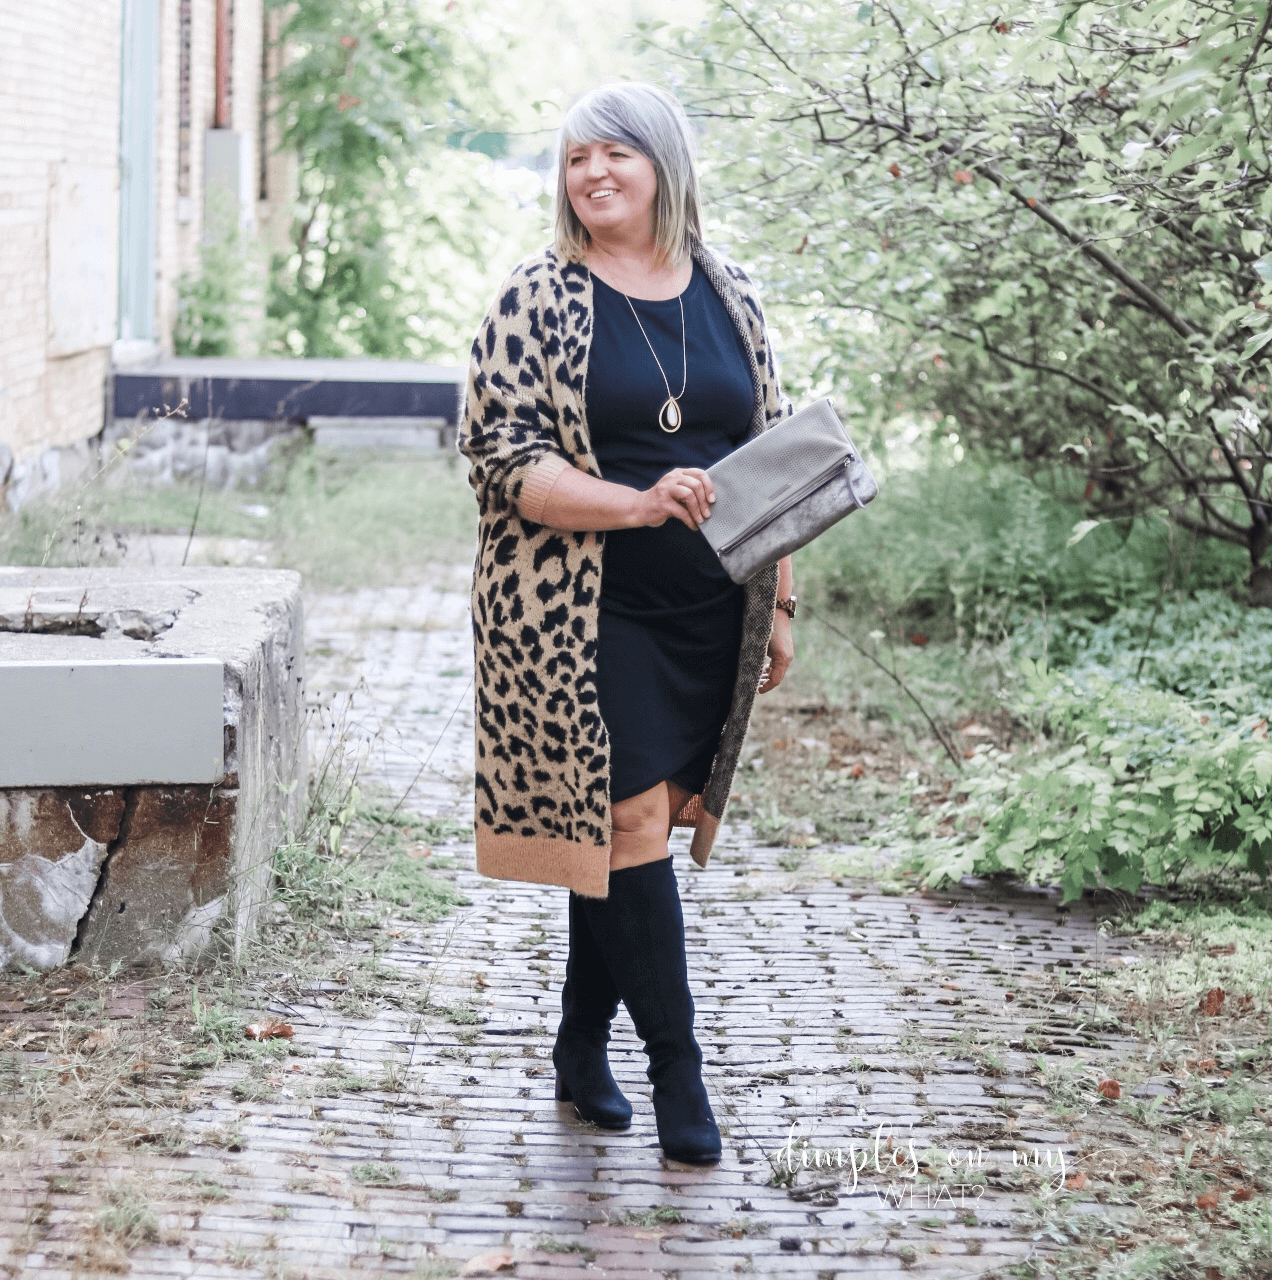 How to style a black t-shirt dress nine ways giving you a plenty of plus size style inspiration with fewer pieces in your closet. #plussize #fashionover50 #midsize #lbd